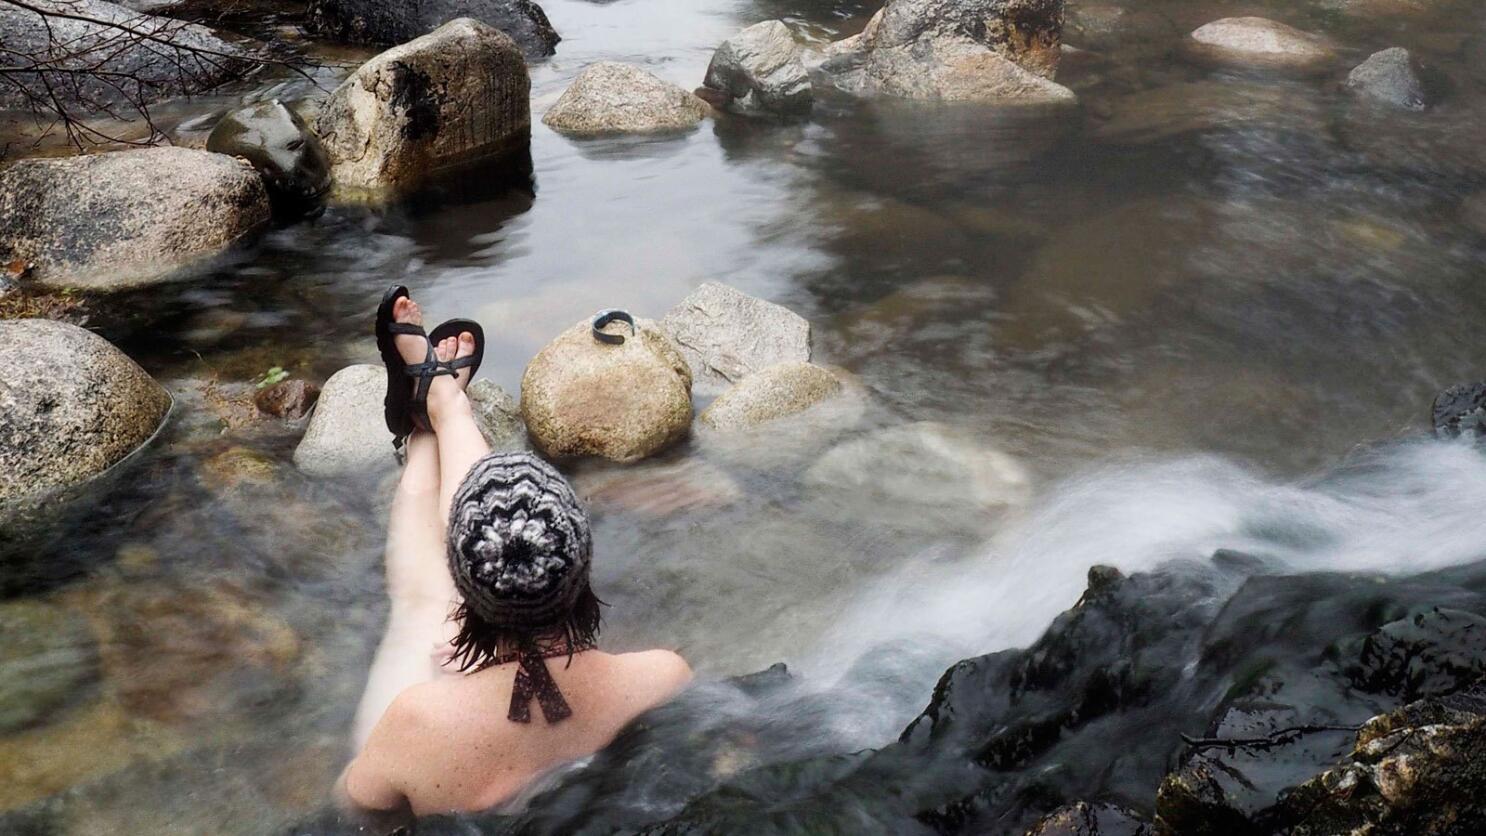 Where to find the best hot springs in California - Los Angeles Times